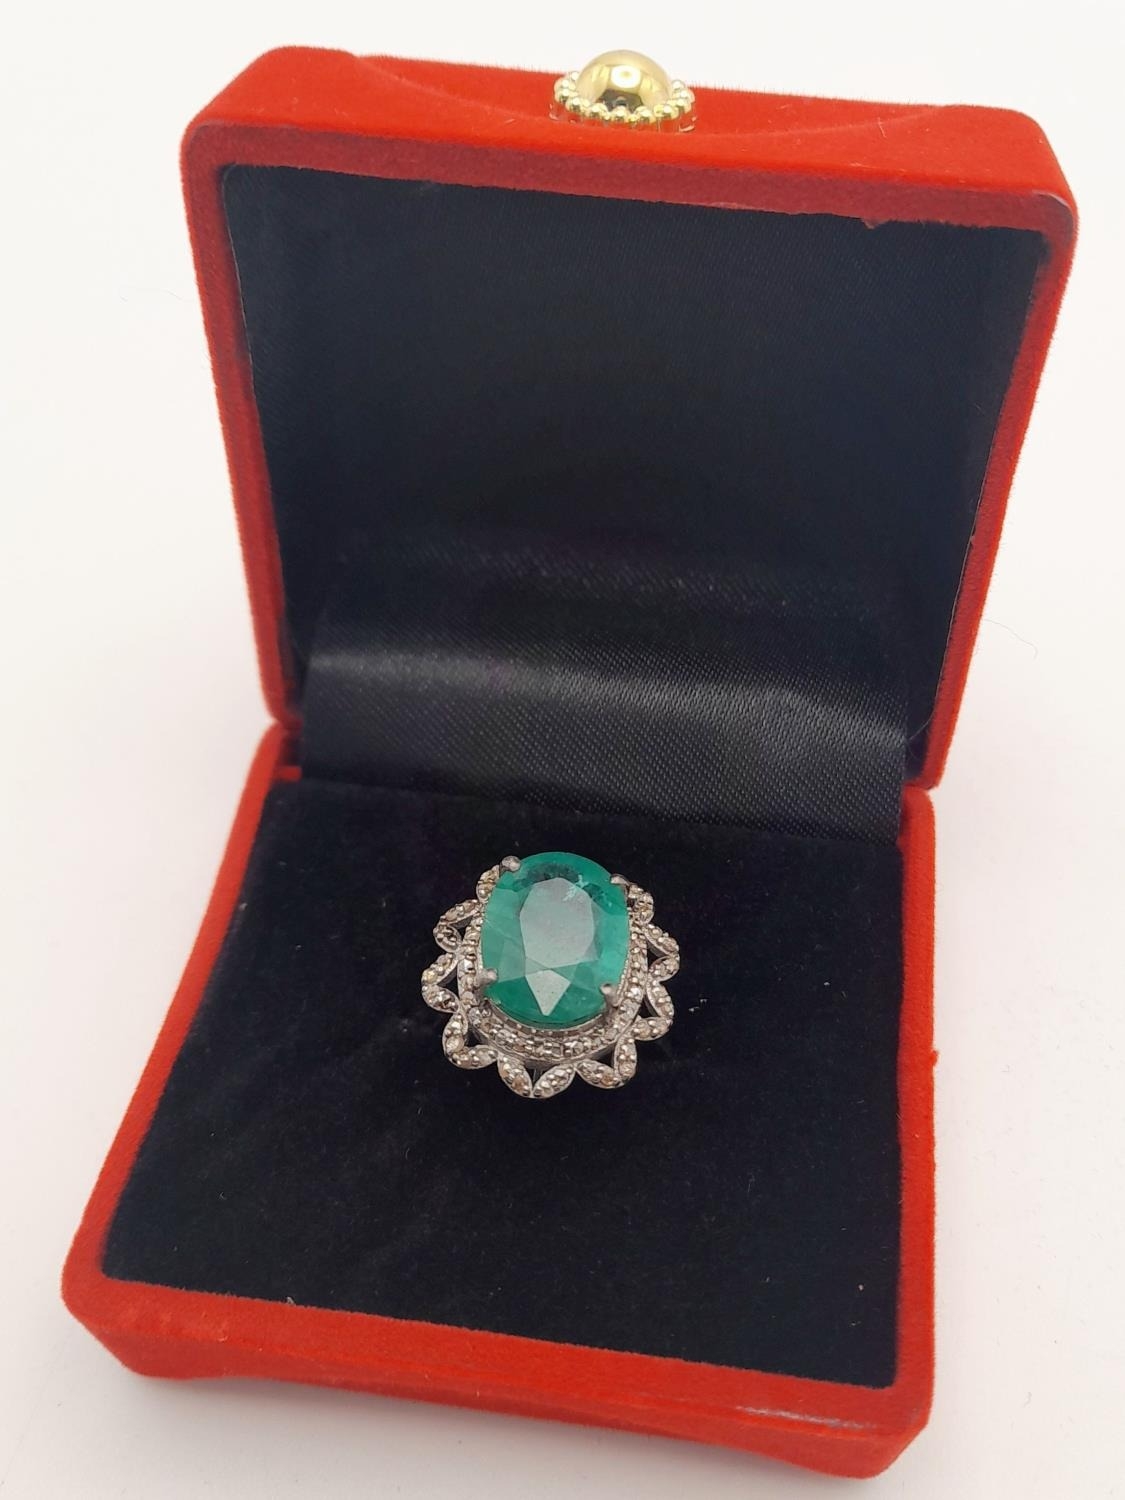 A 6.15ct Emerald Ring with 0.75ctw of Diamond Accents. Set in 925 Silver. Size N. Comes with a - Image 6 of 6